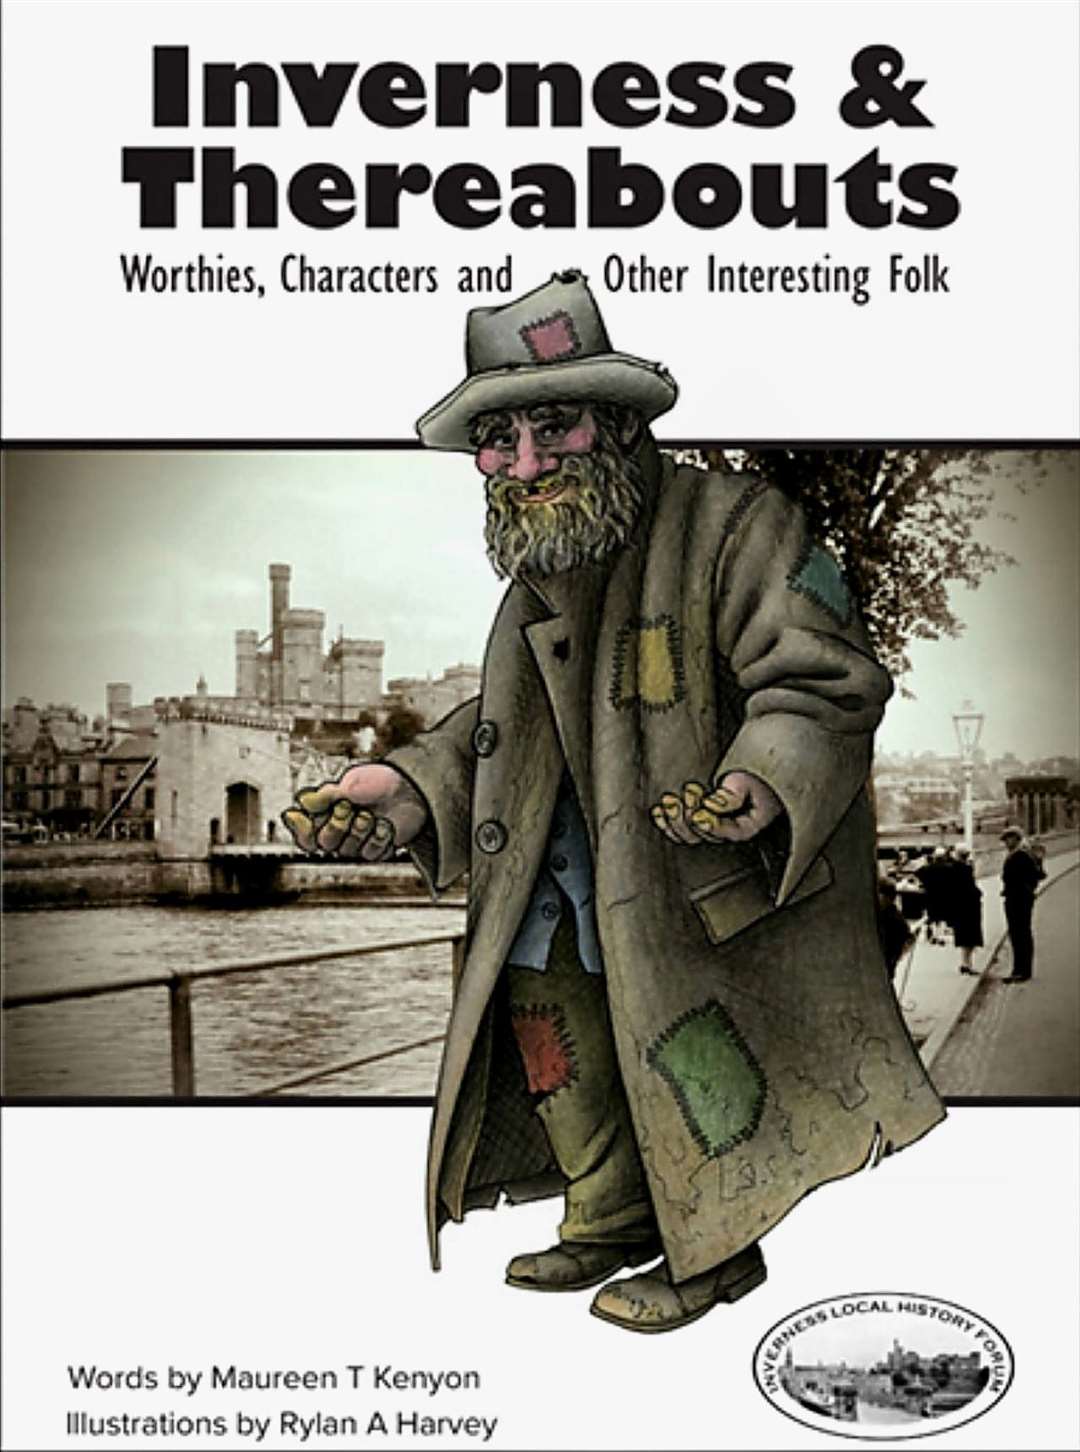 The cover of the book featuring tramp Forty Pockets.